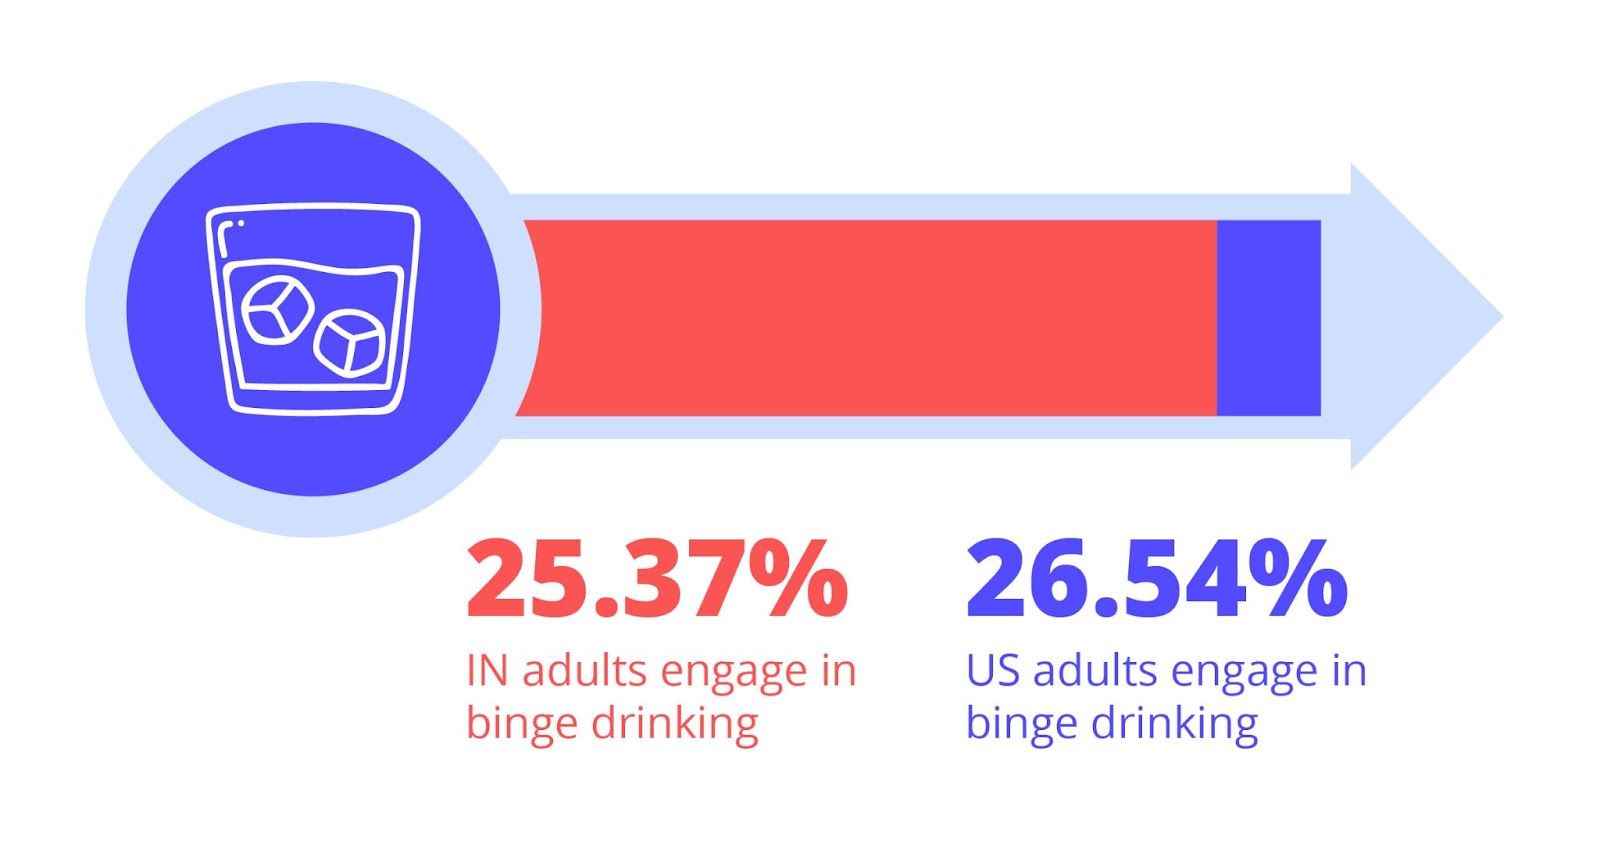 25.37 indiana adults engage in binge drinking. 26.54 american adults engage in binge drinking